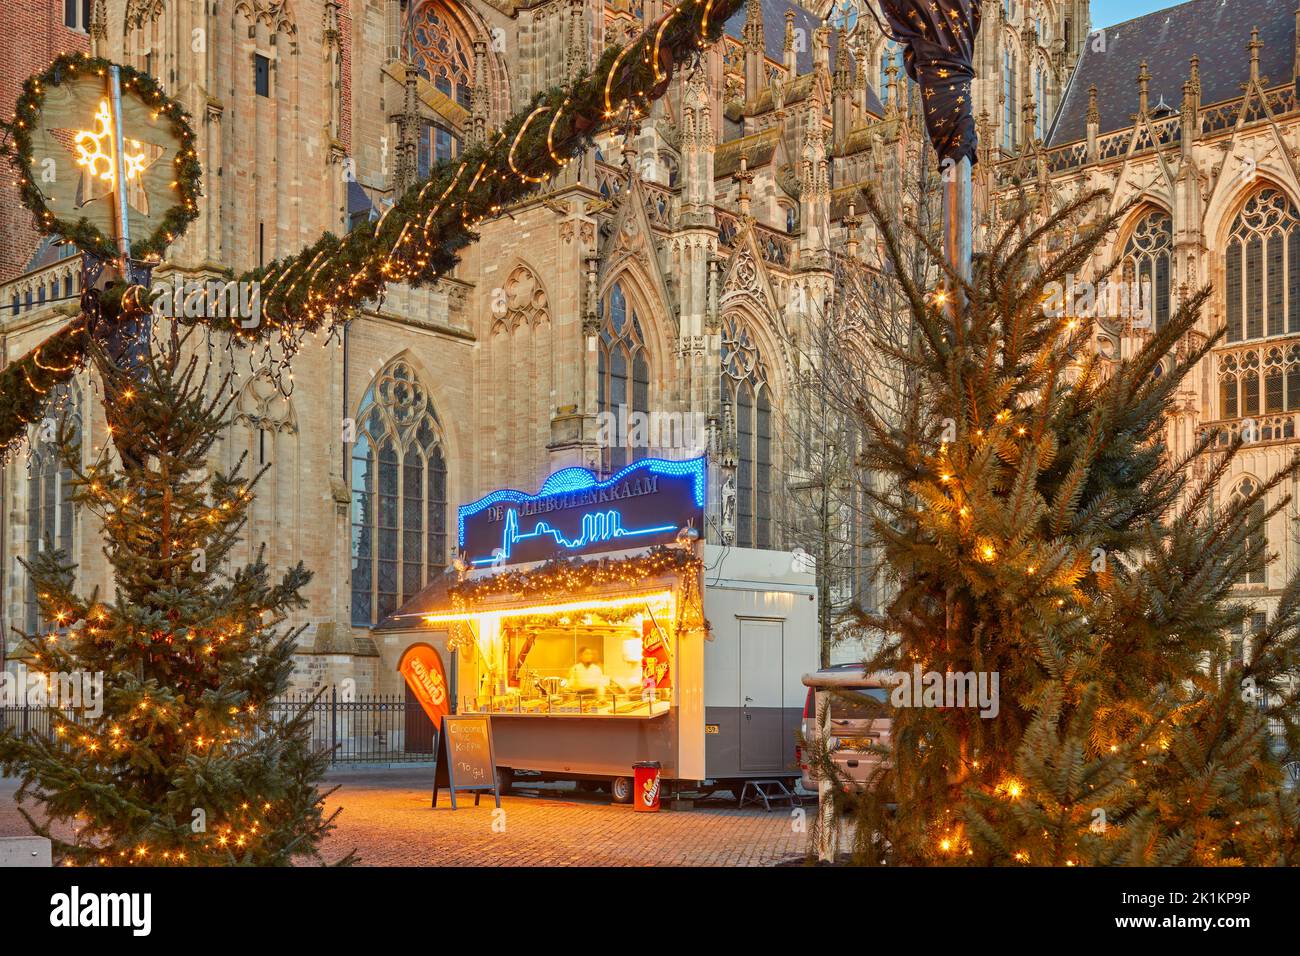 Den bosch, The Netherlands - December 21, 2021: Stand selling traditional Dutch 'oliebollen' (deep-fried dough balls) in winter in the city center of Stock Photo